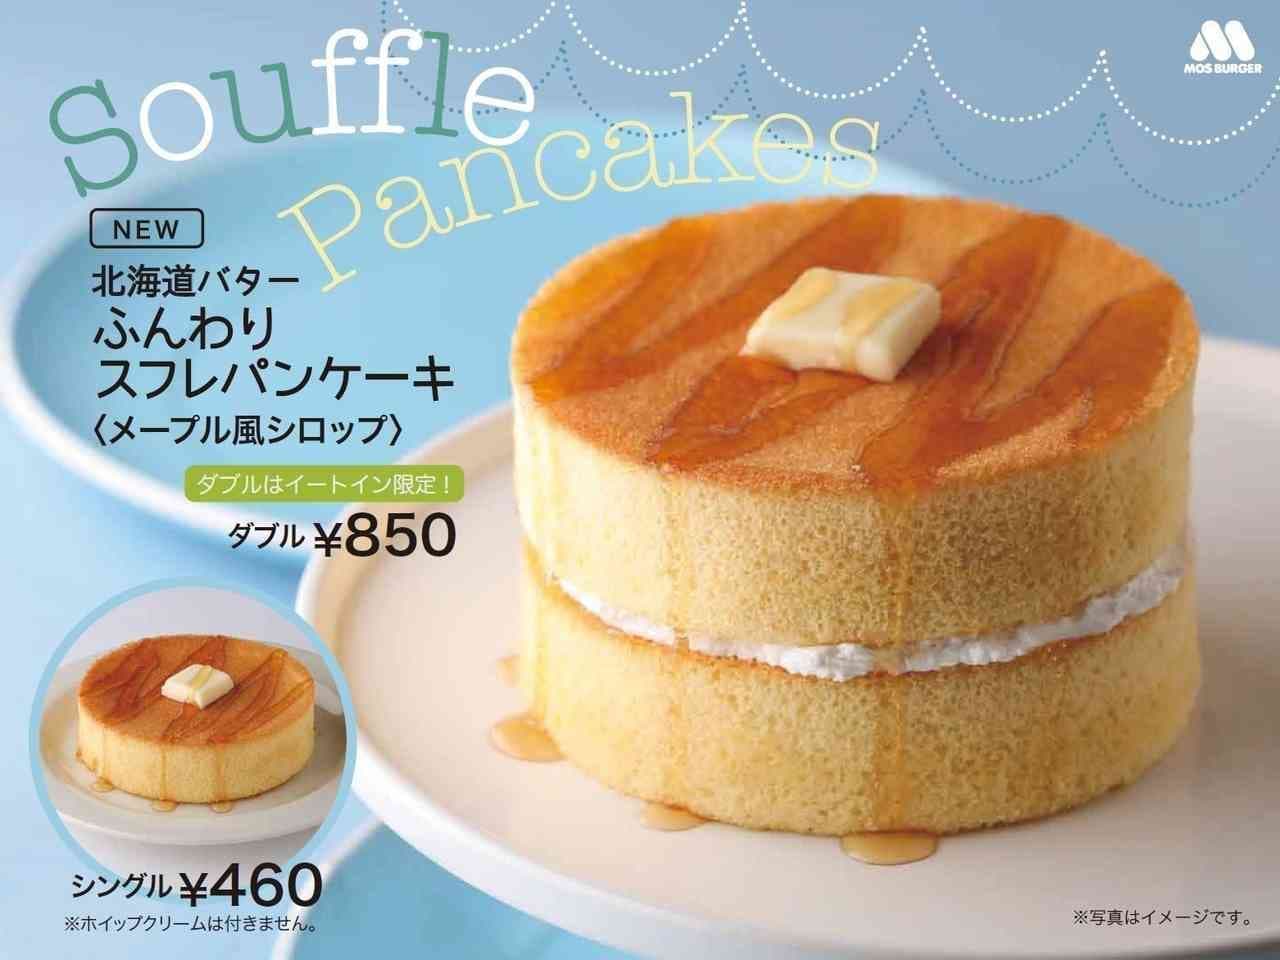 Mos Burger & Cafe "Hokkaido Butter Fluffy Souffle Pancakes with Maple-Style Syrup